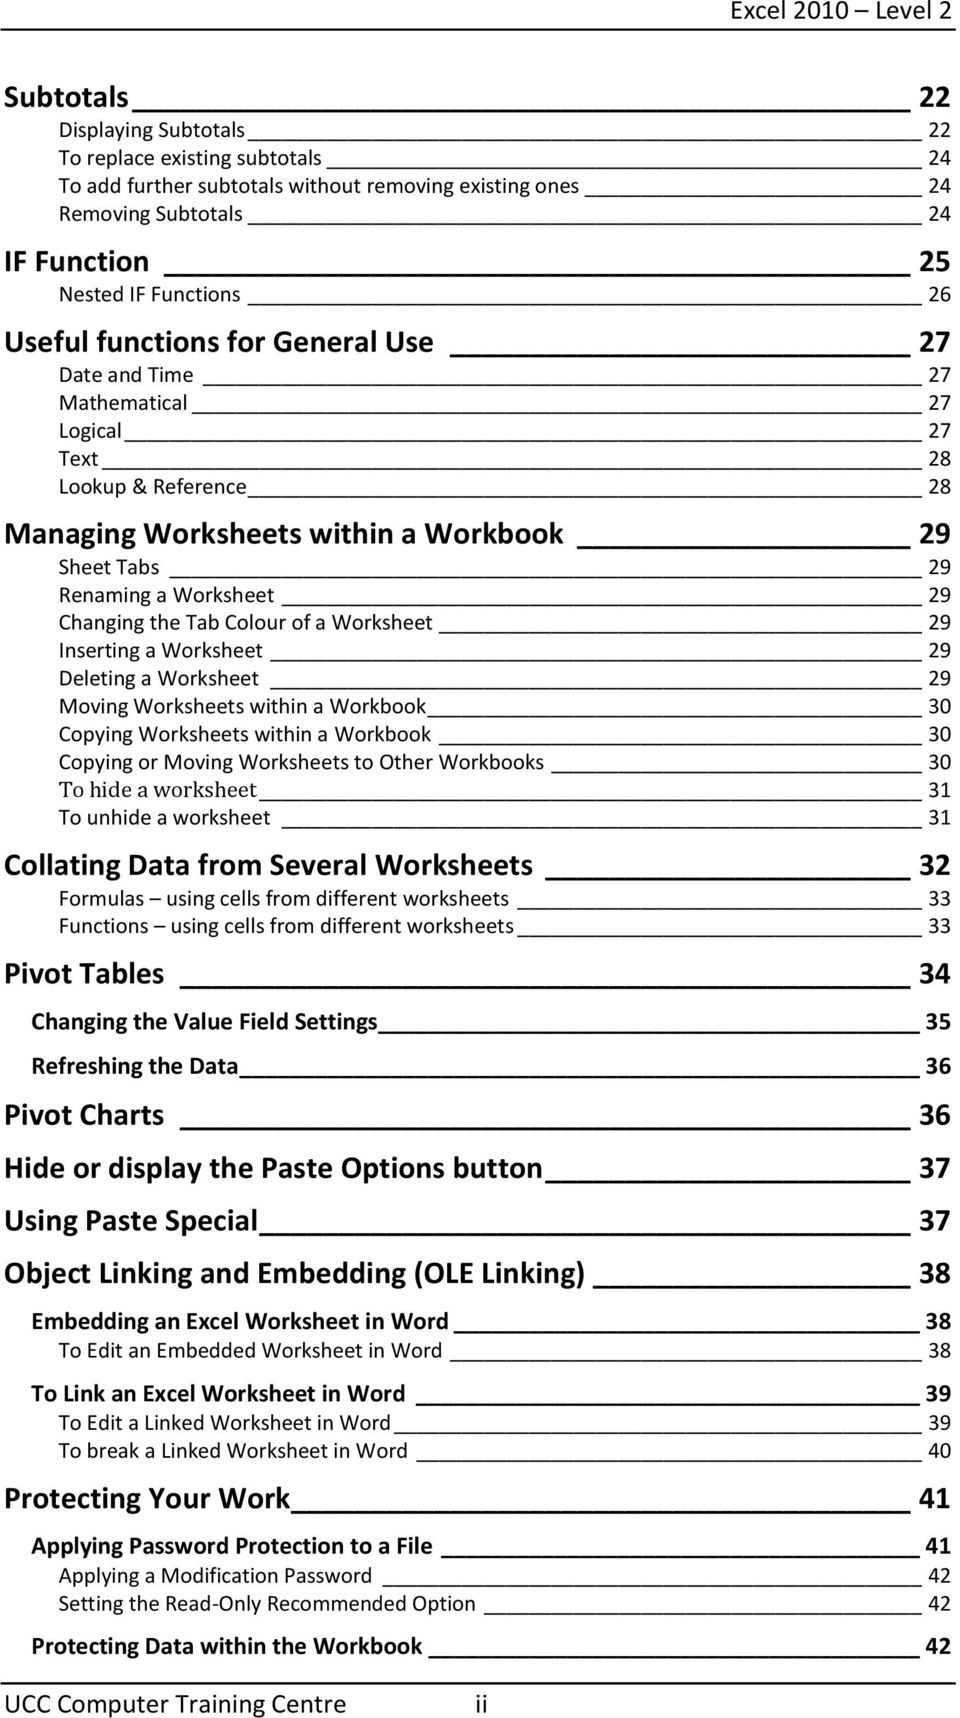 Colour of a Worksheet 29 Inserting a Worksheet 29 Deleting a Worksheet 29 Moving Worksheets within a Workbook 30 Copying Worksheets within a Workbook 30 Copying or Moving Worksheets to Other